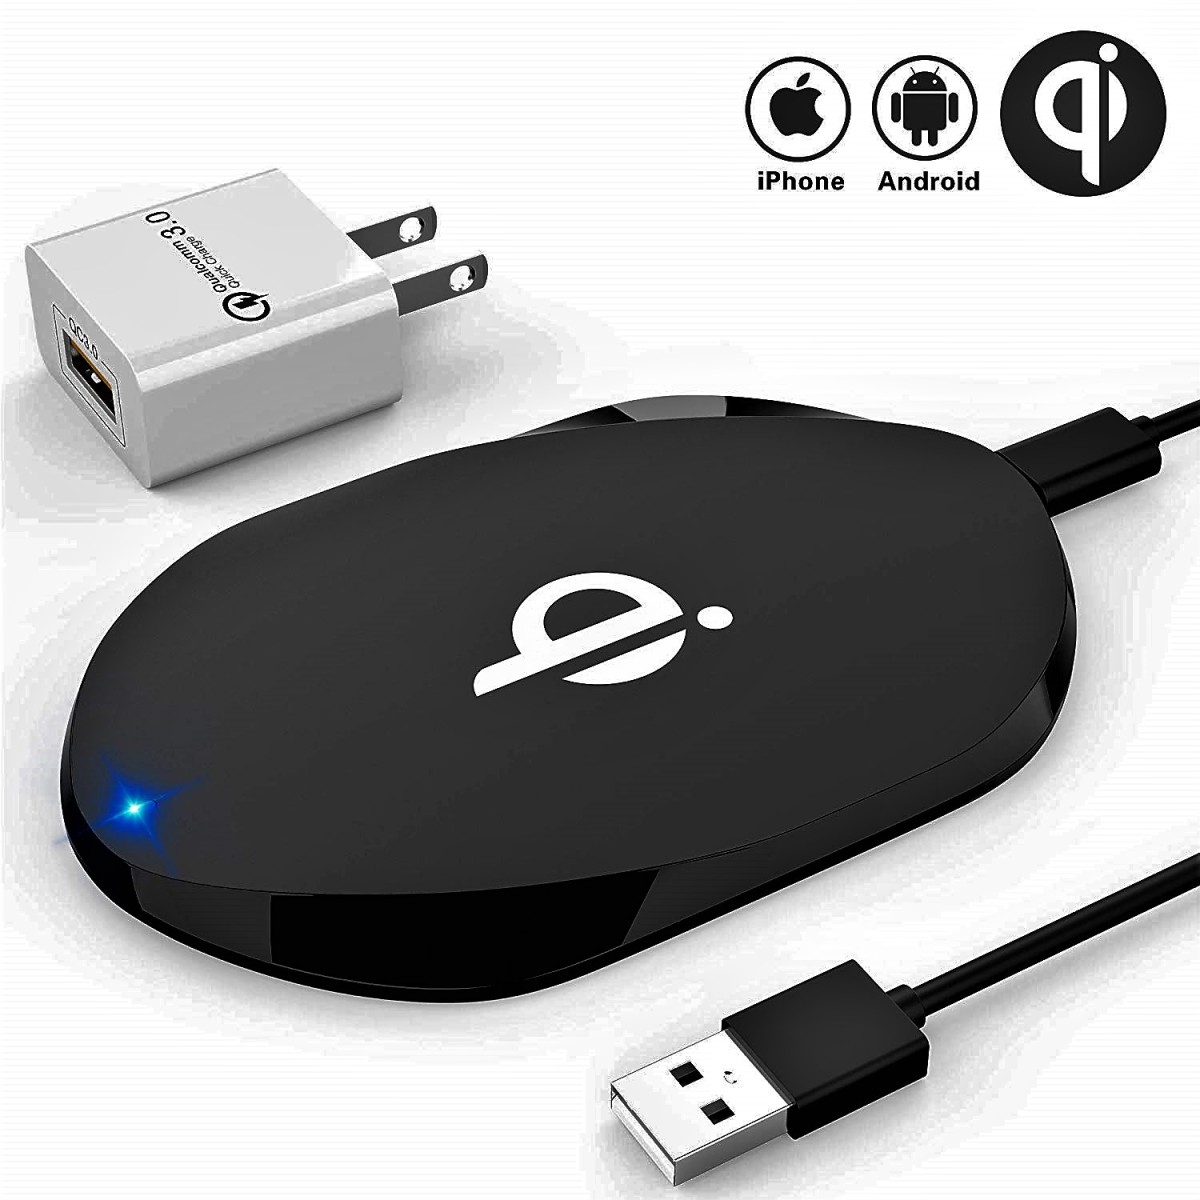 Zttopo Wireless Charging Pad: Best iPhone Qi Charger?